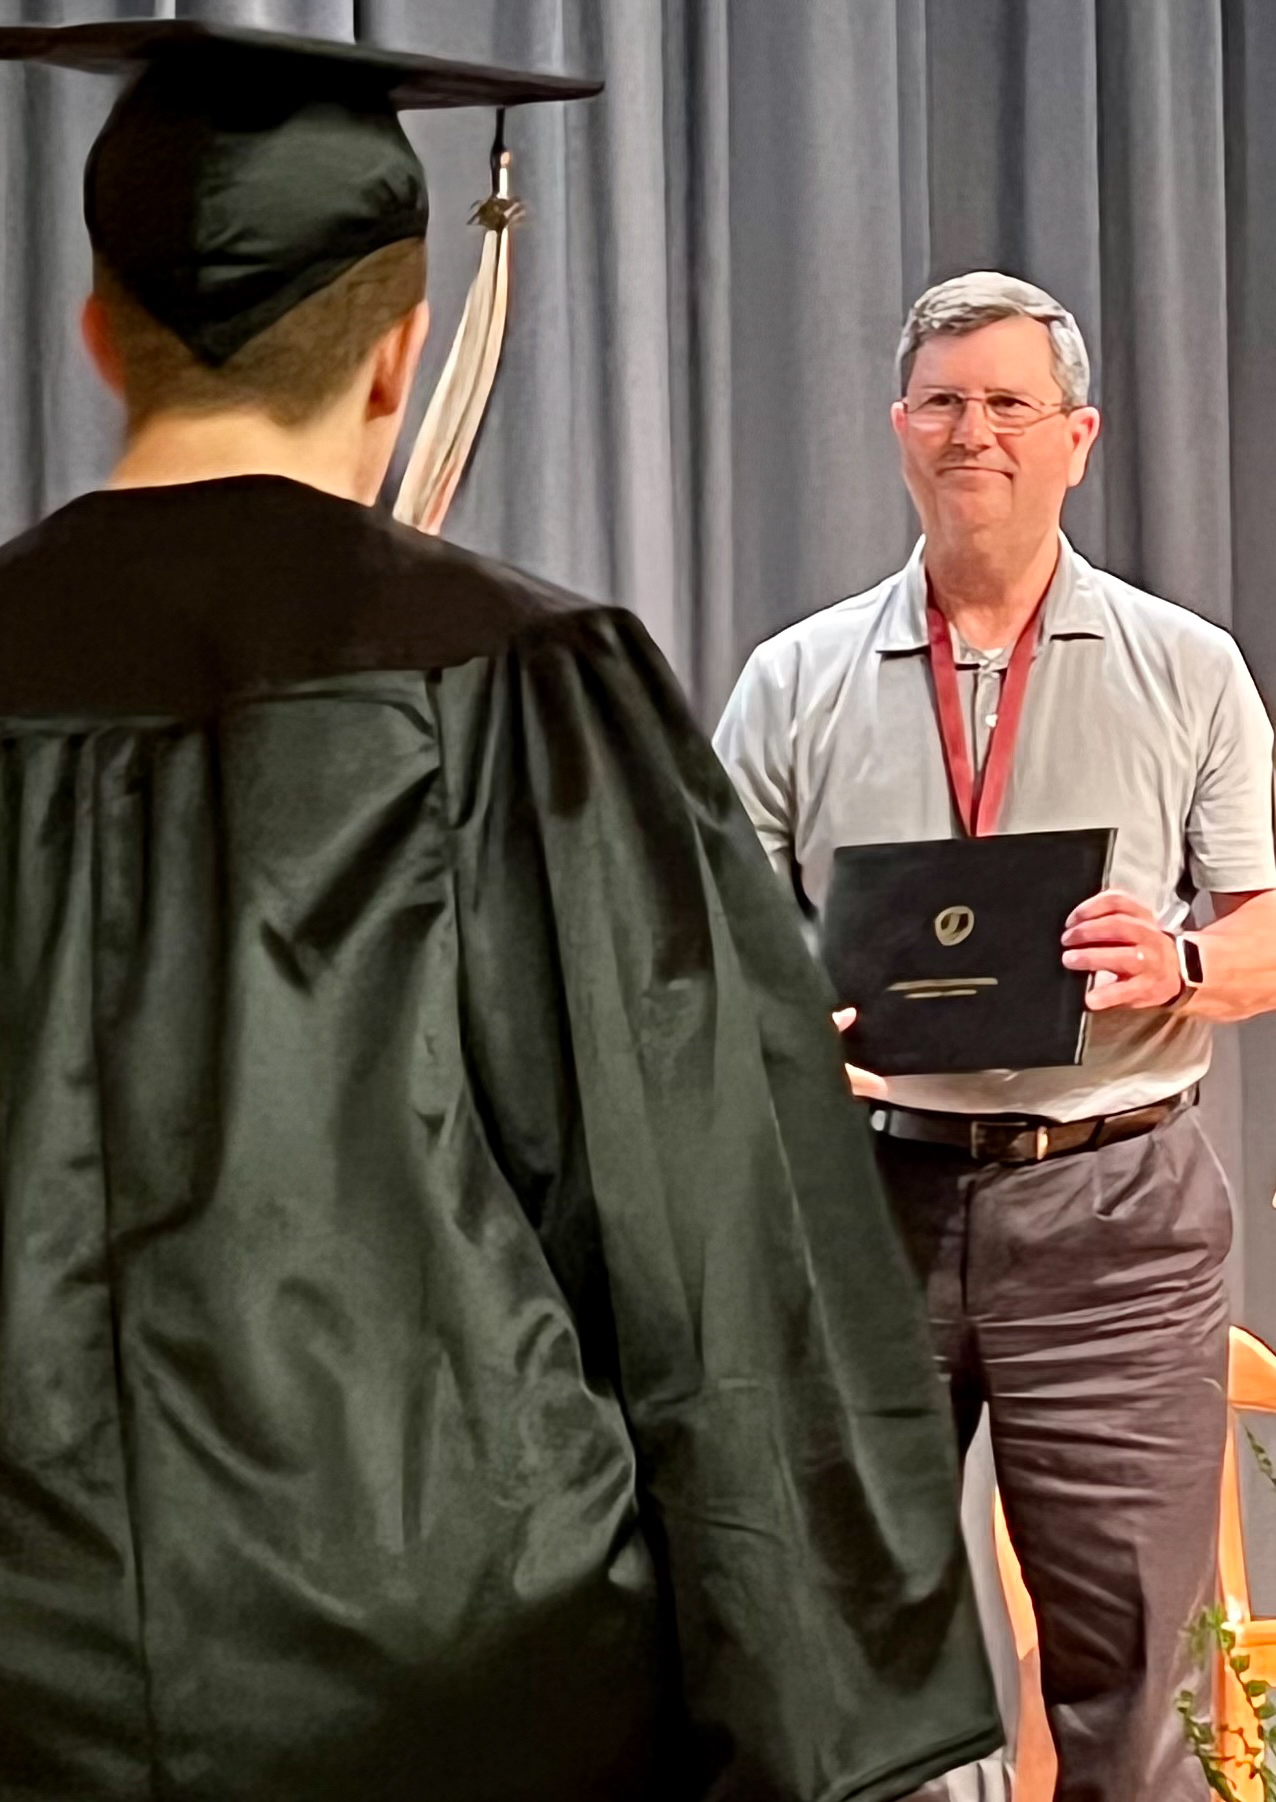 A man holds a diploma to a graduate in a cap and gown whose back is to the camera